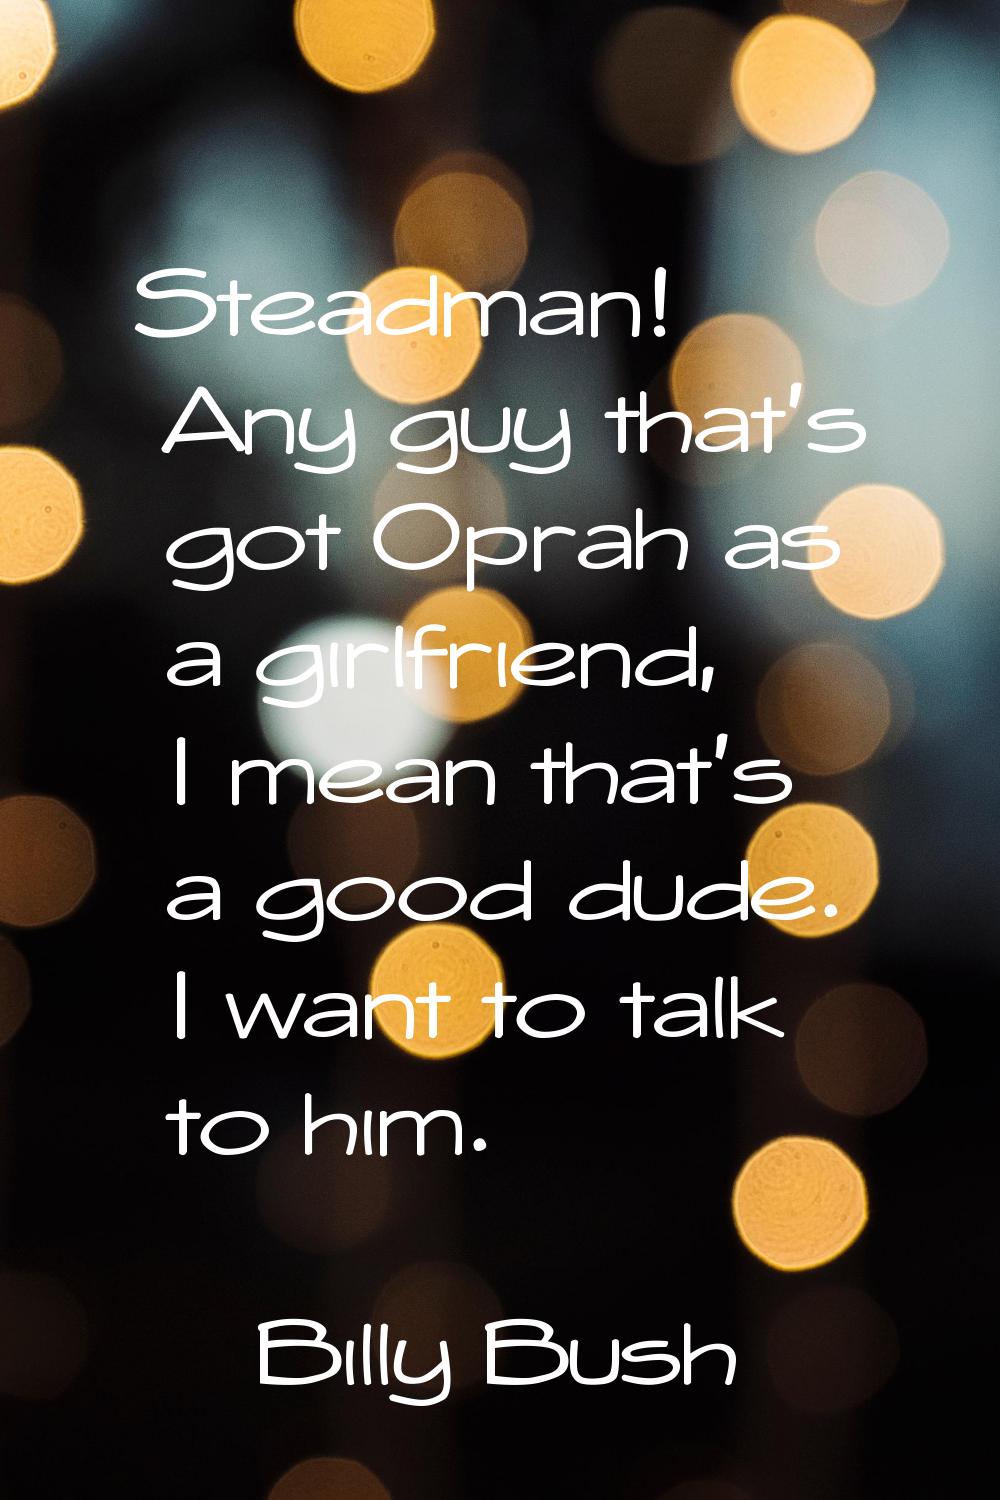 Steadman! Any guy that's got Oprah as a girlfriend, I mean that's a good dude. I want to talk to hi